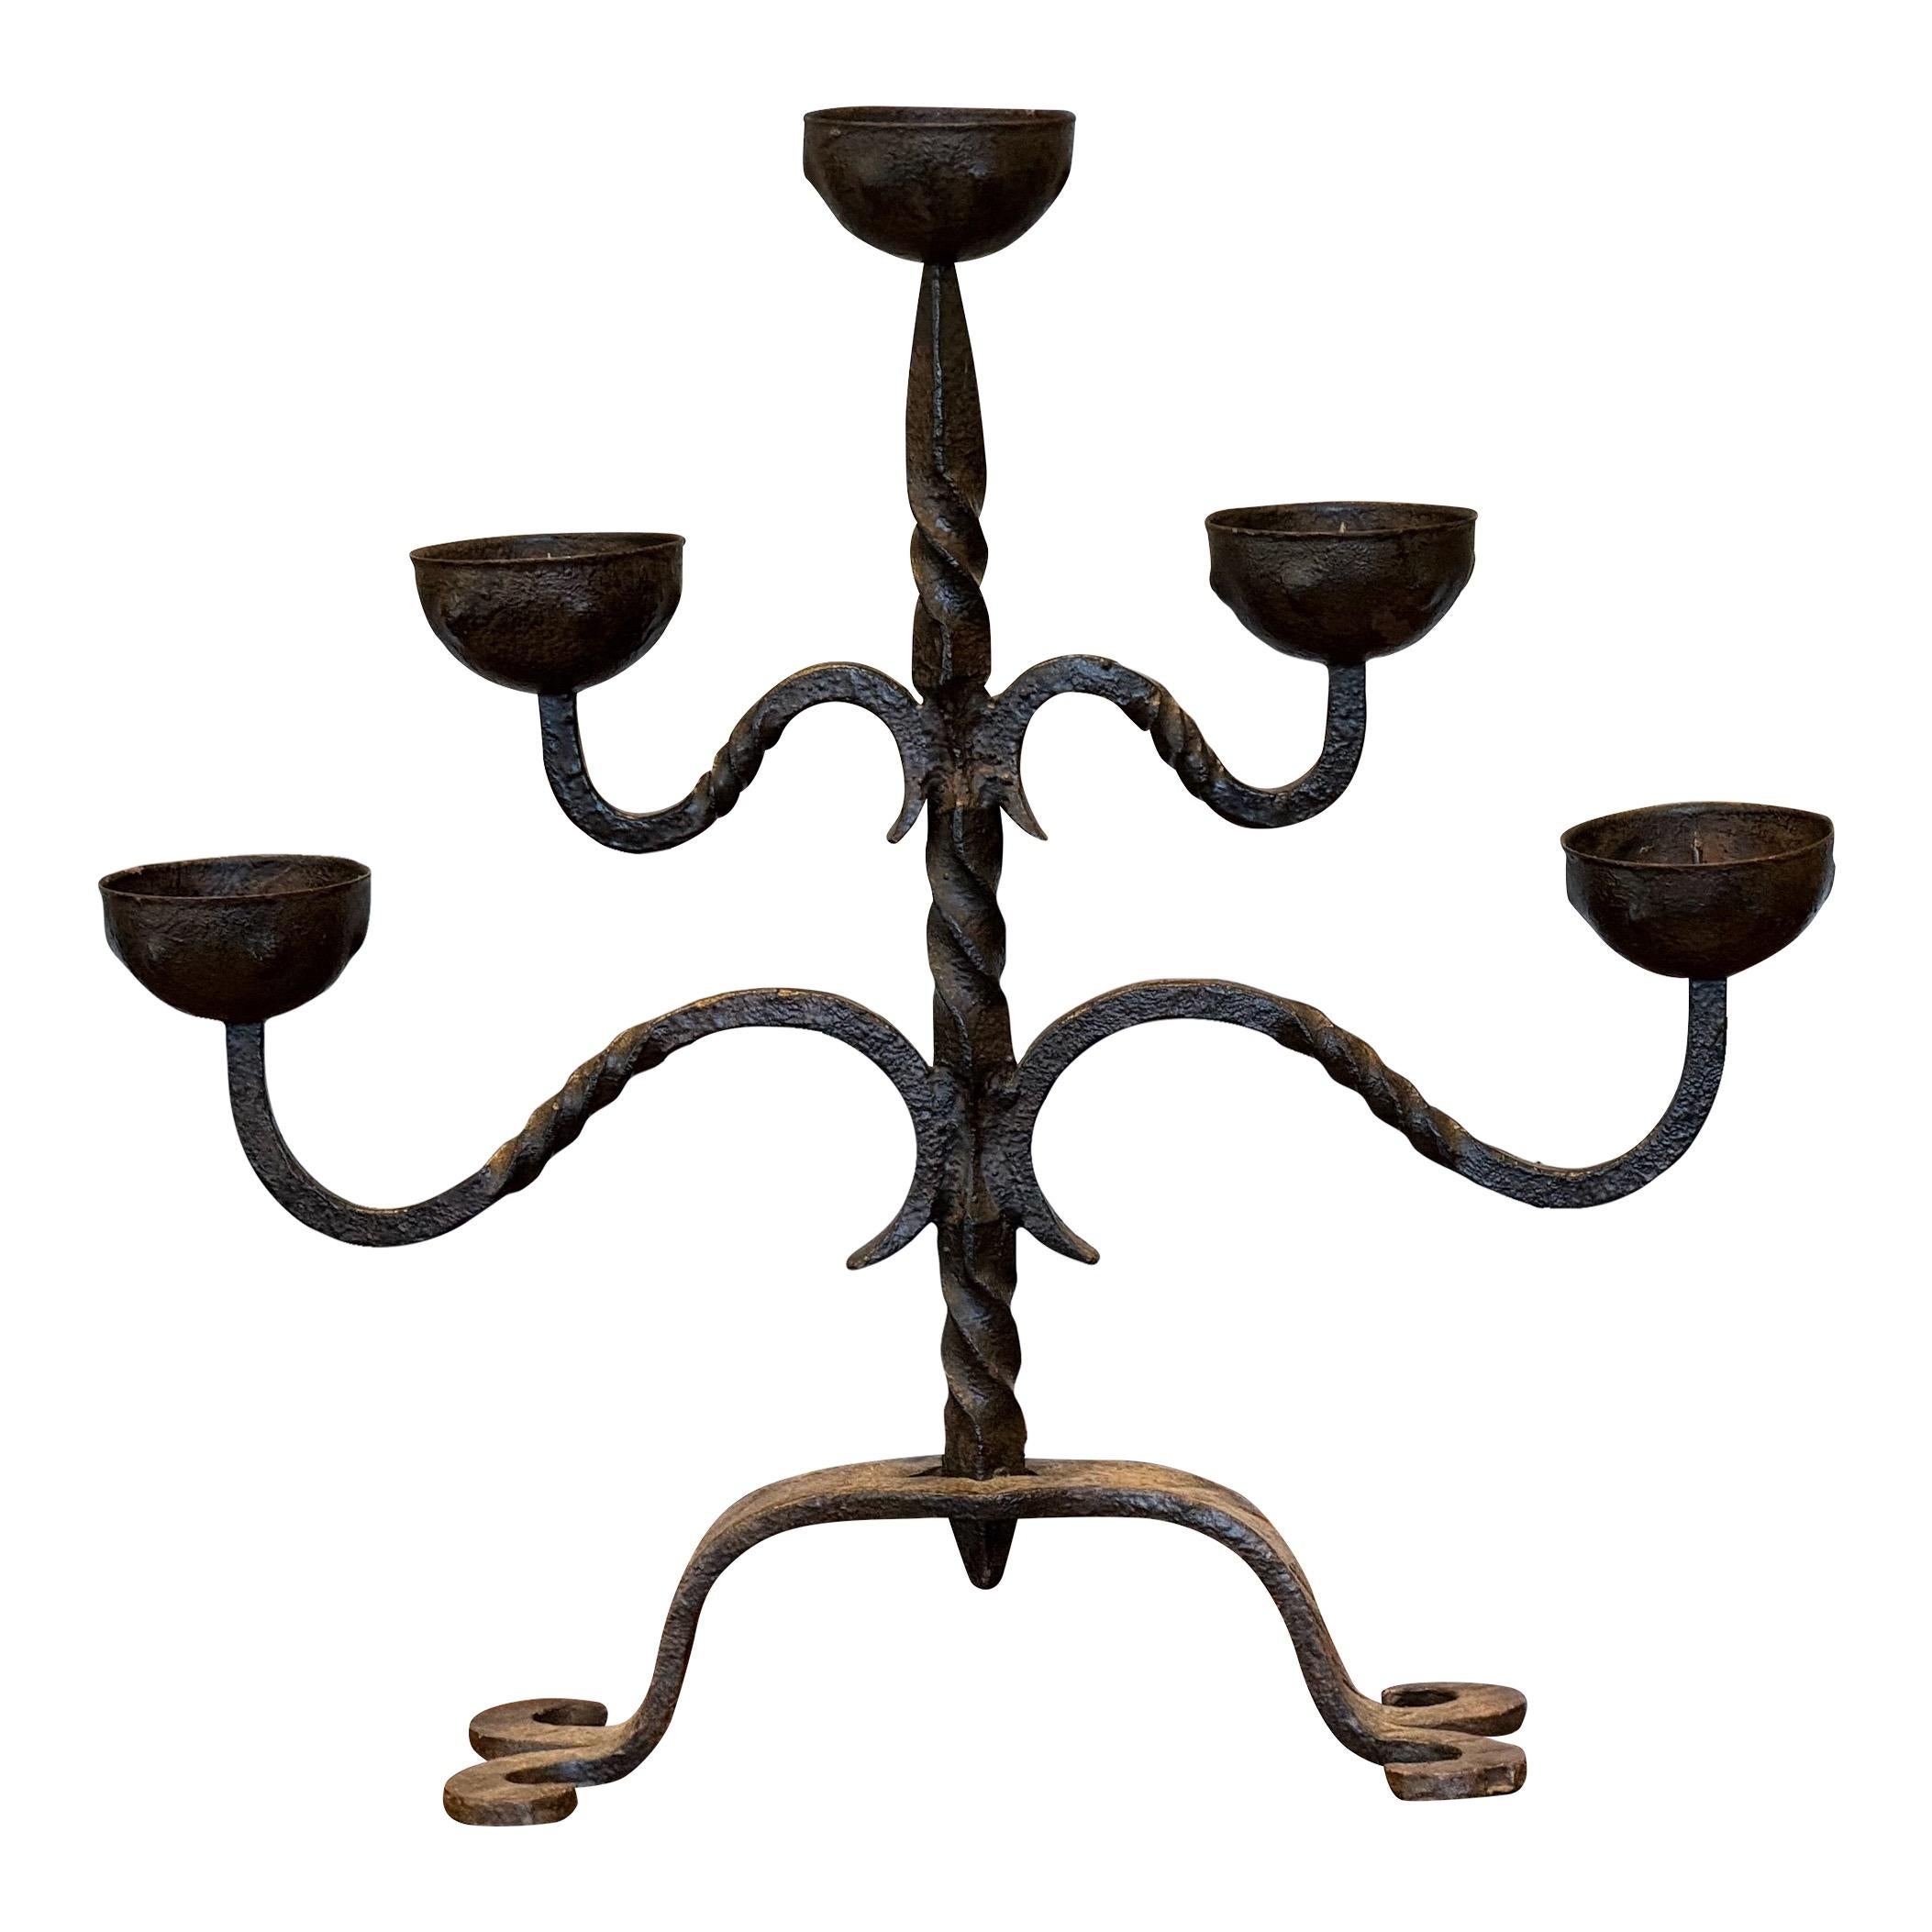 Late 19th Century Iron Candle Stand